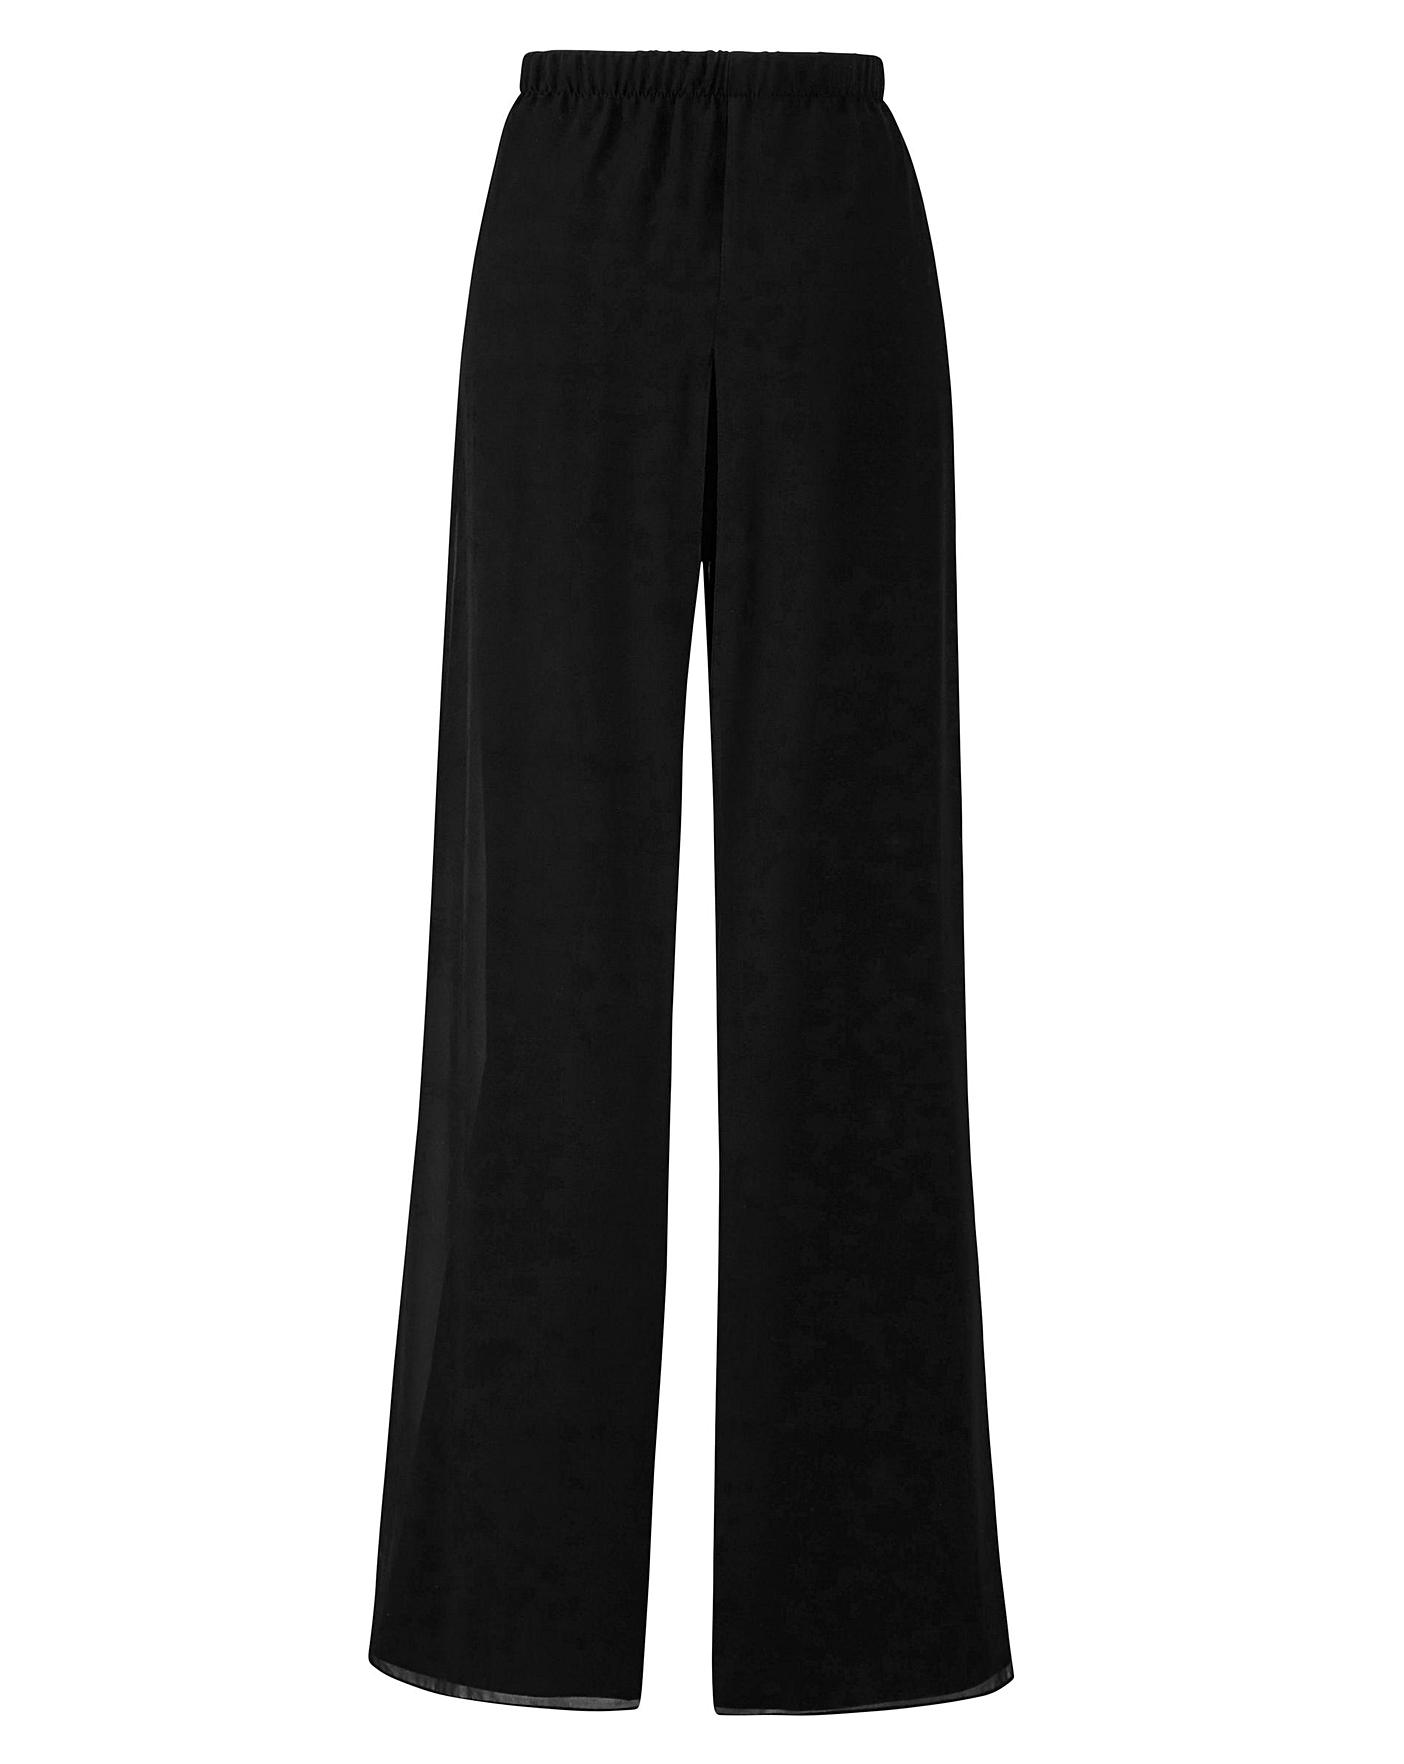 JOANNA HOPE Linen Blend Trousers 31in  Oxendales